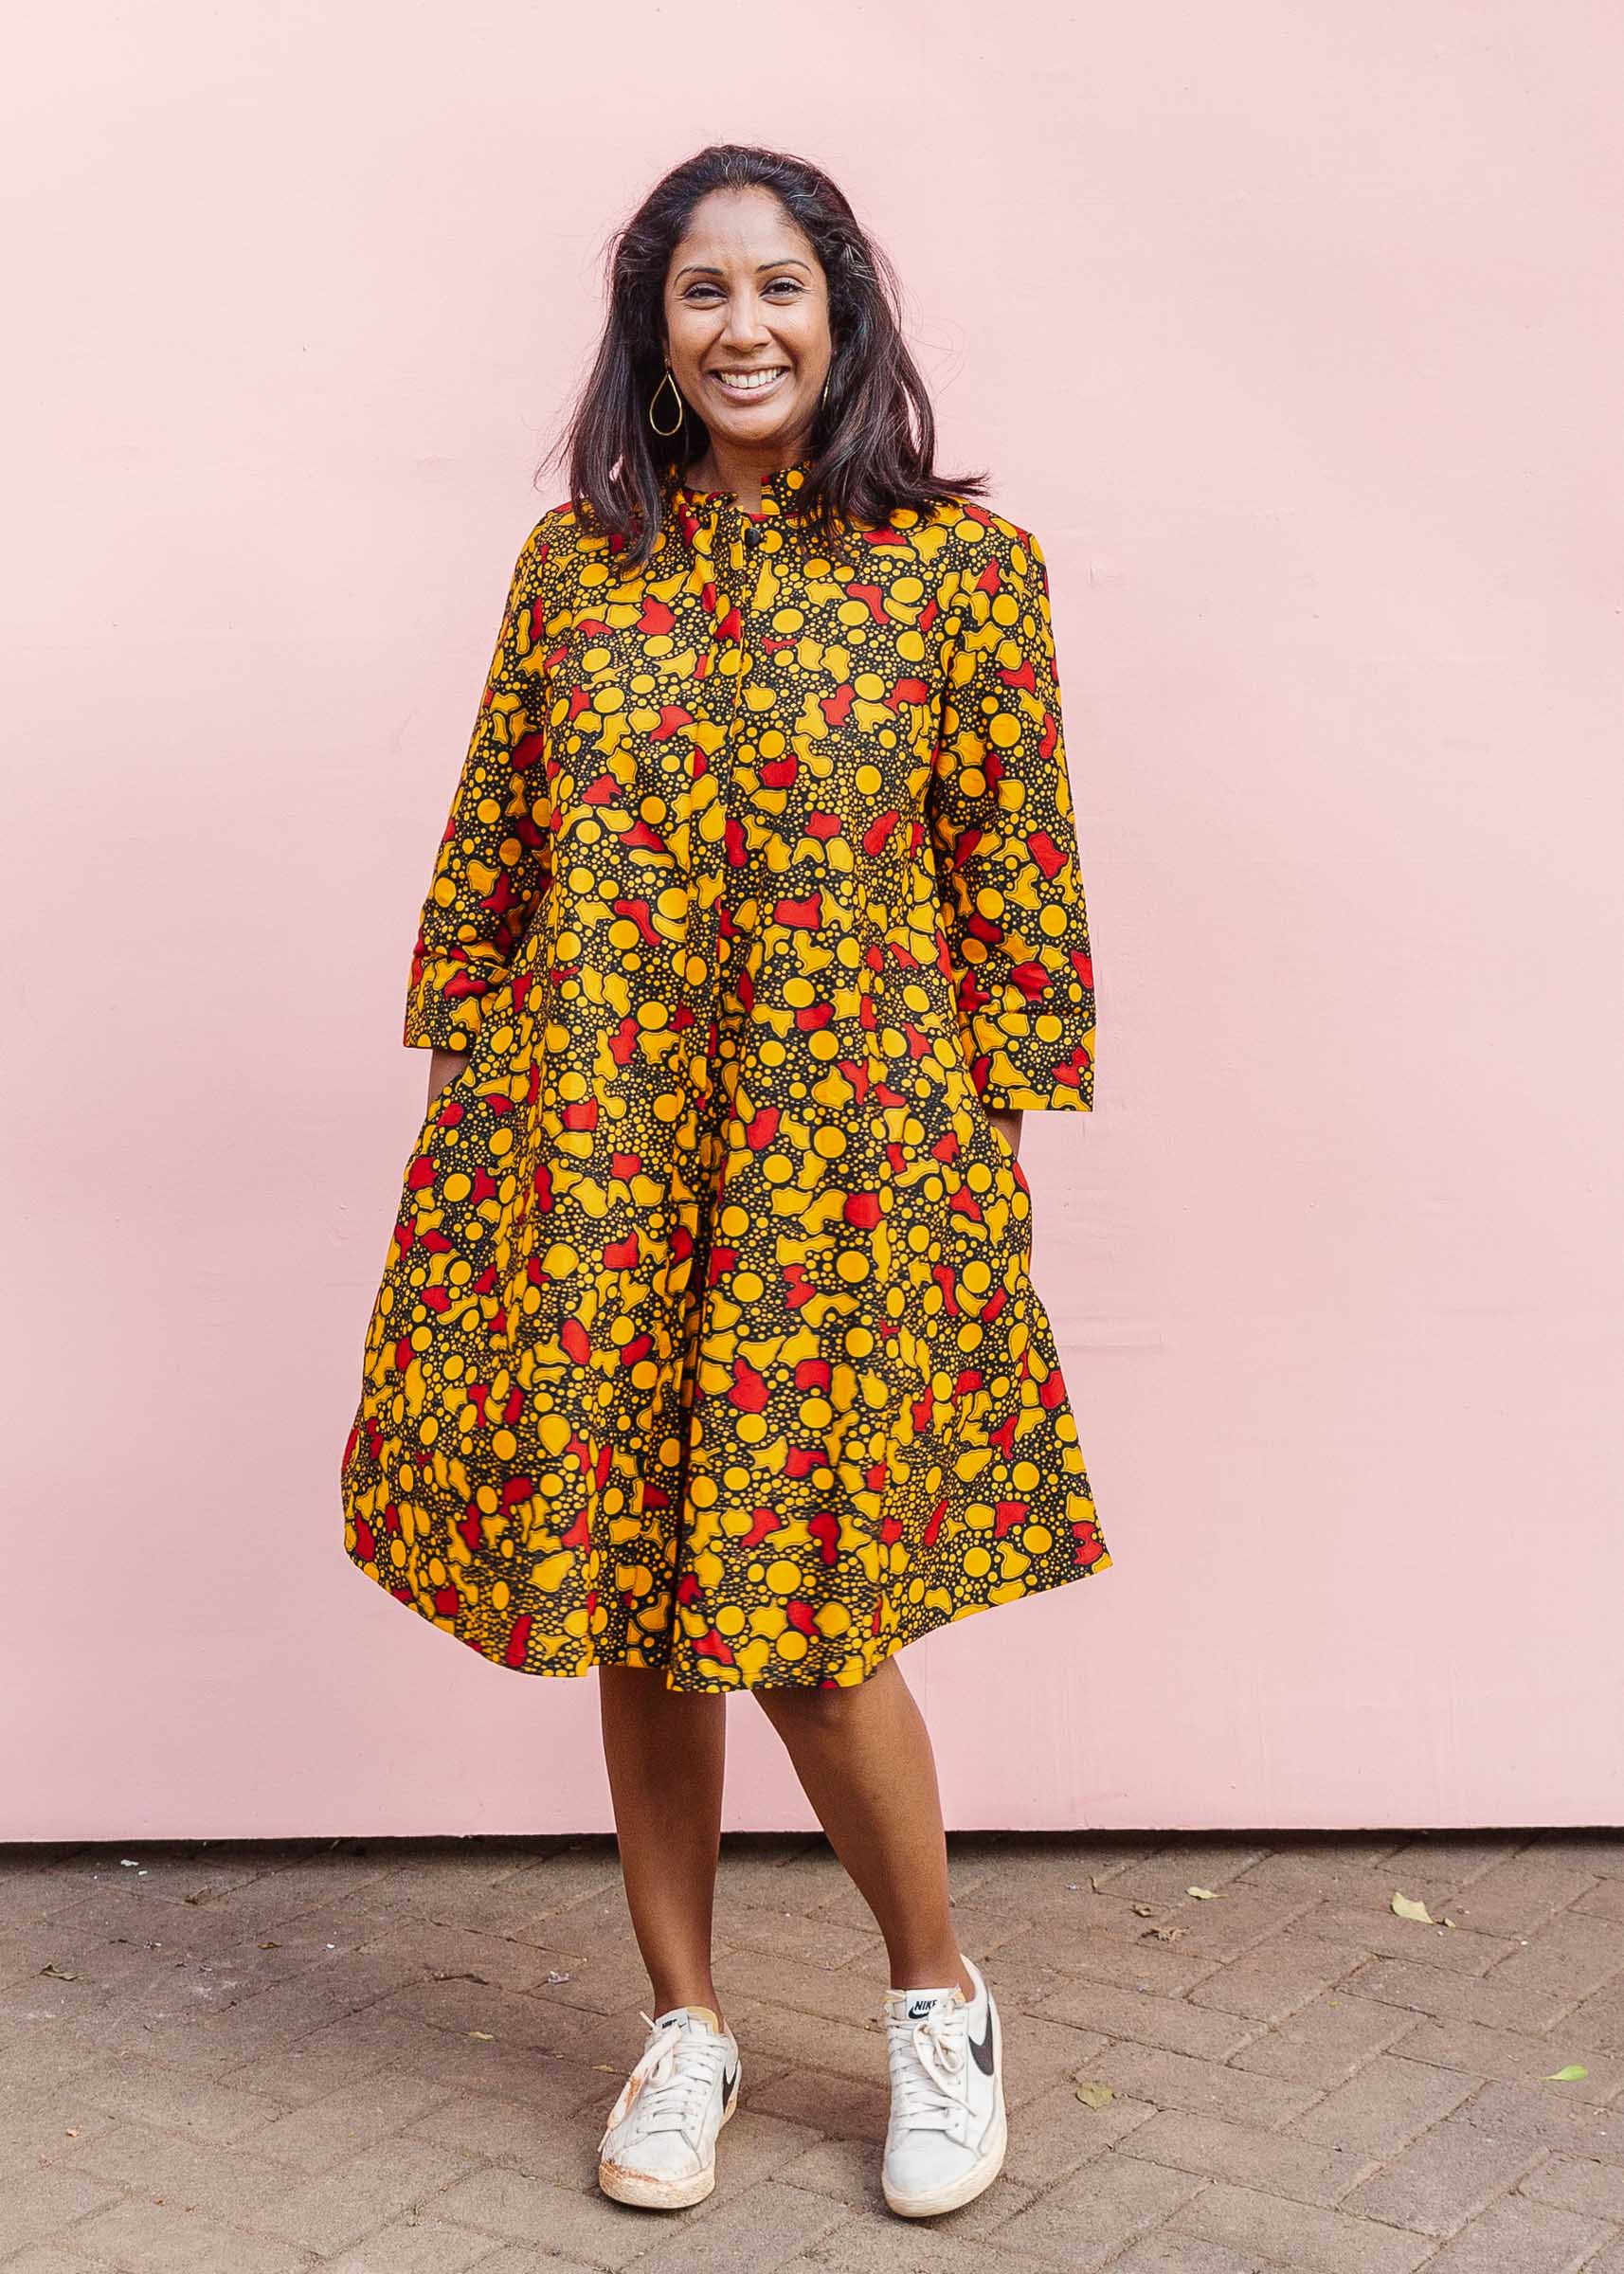 The model is wearing black dress with yellow and red small blob print.